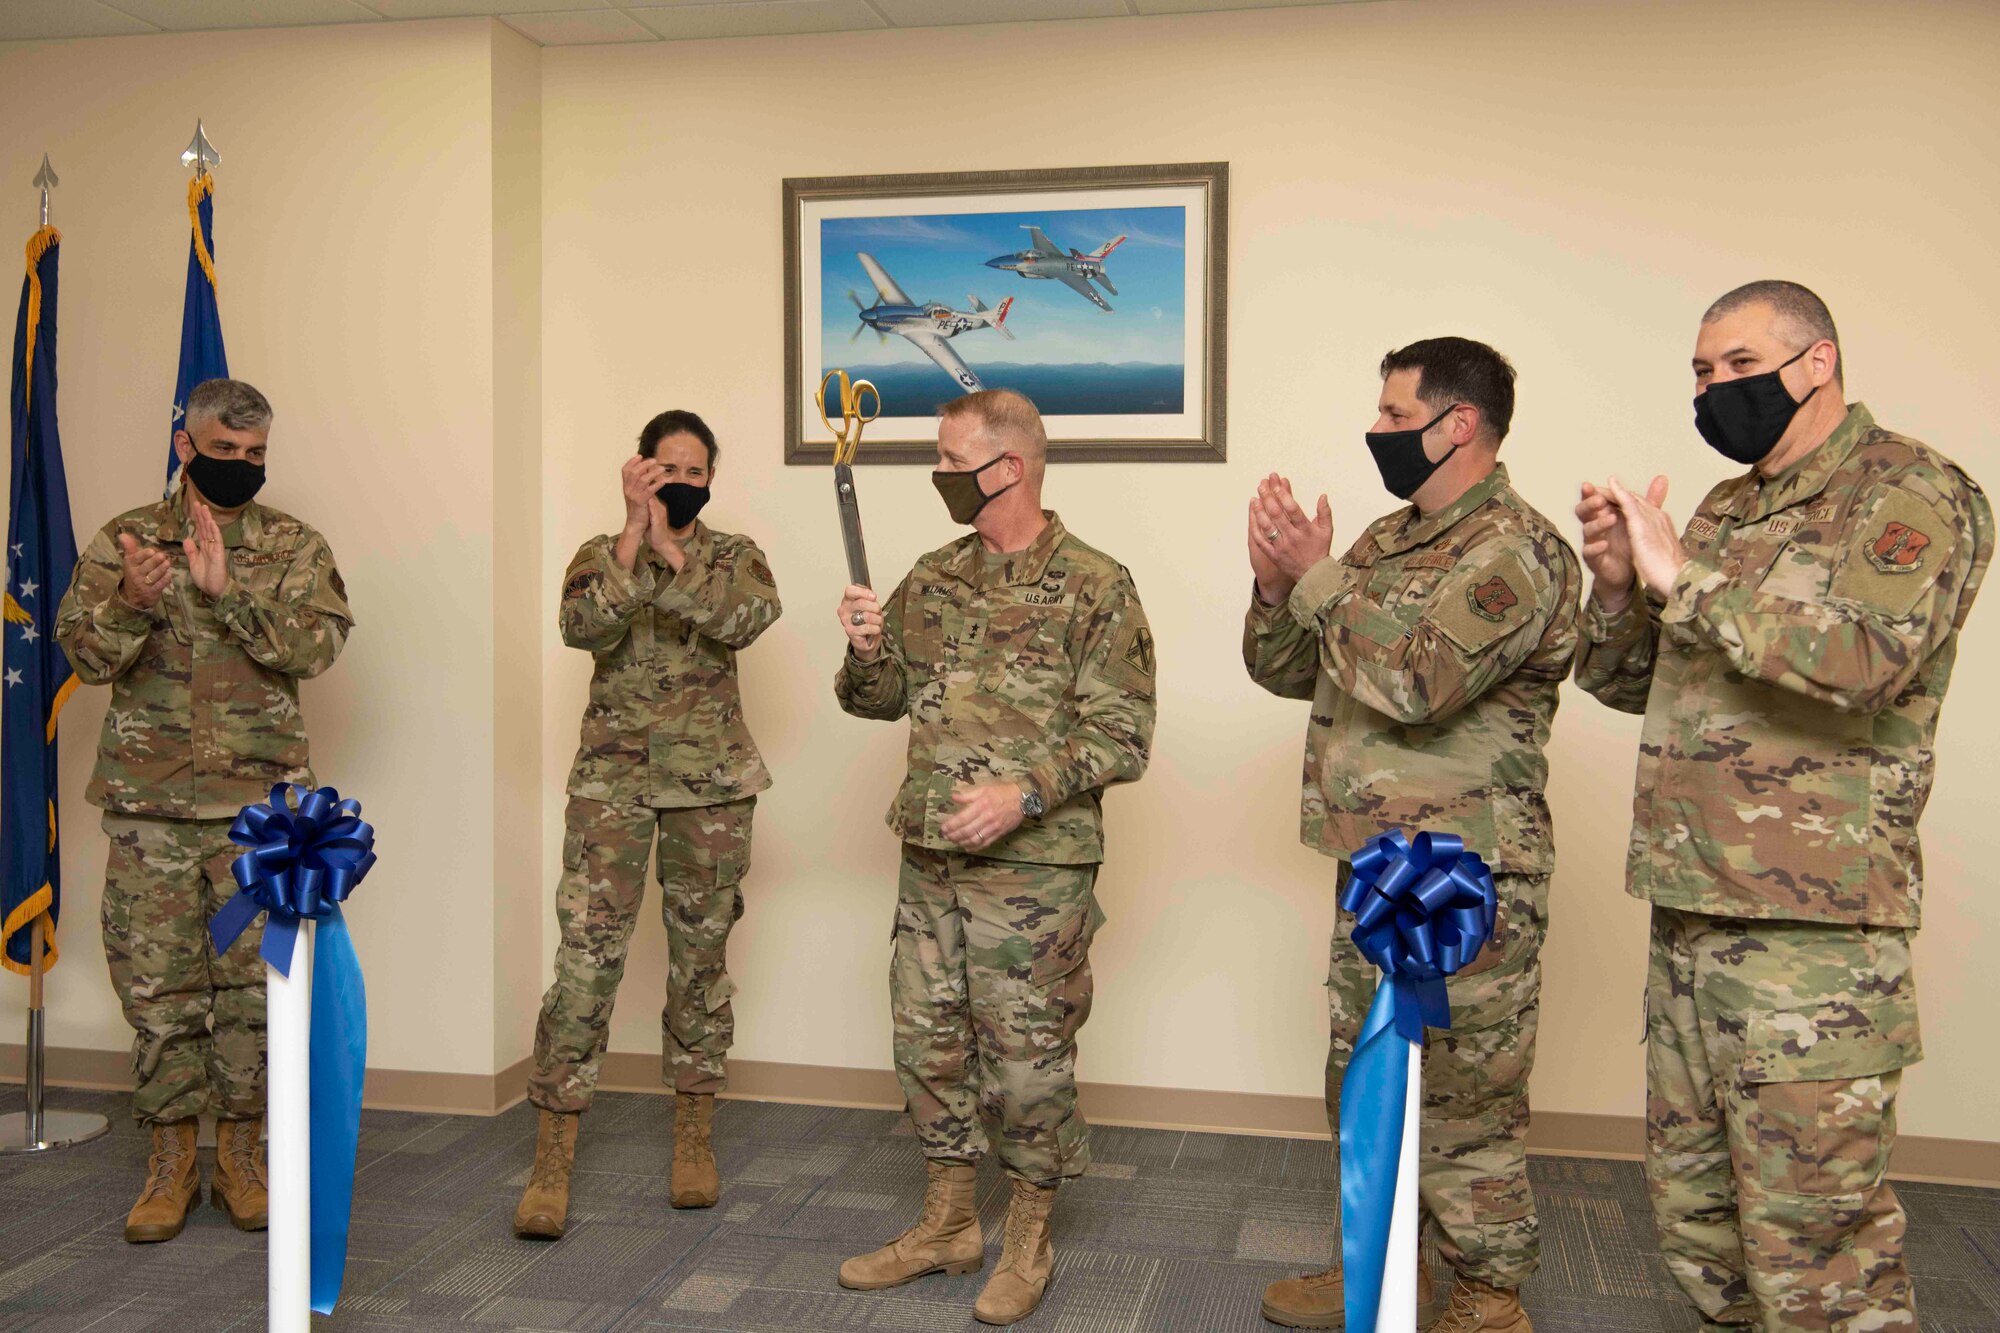 U.S. Air Force leaders applaud during a ribbon cutting ceremony